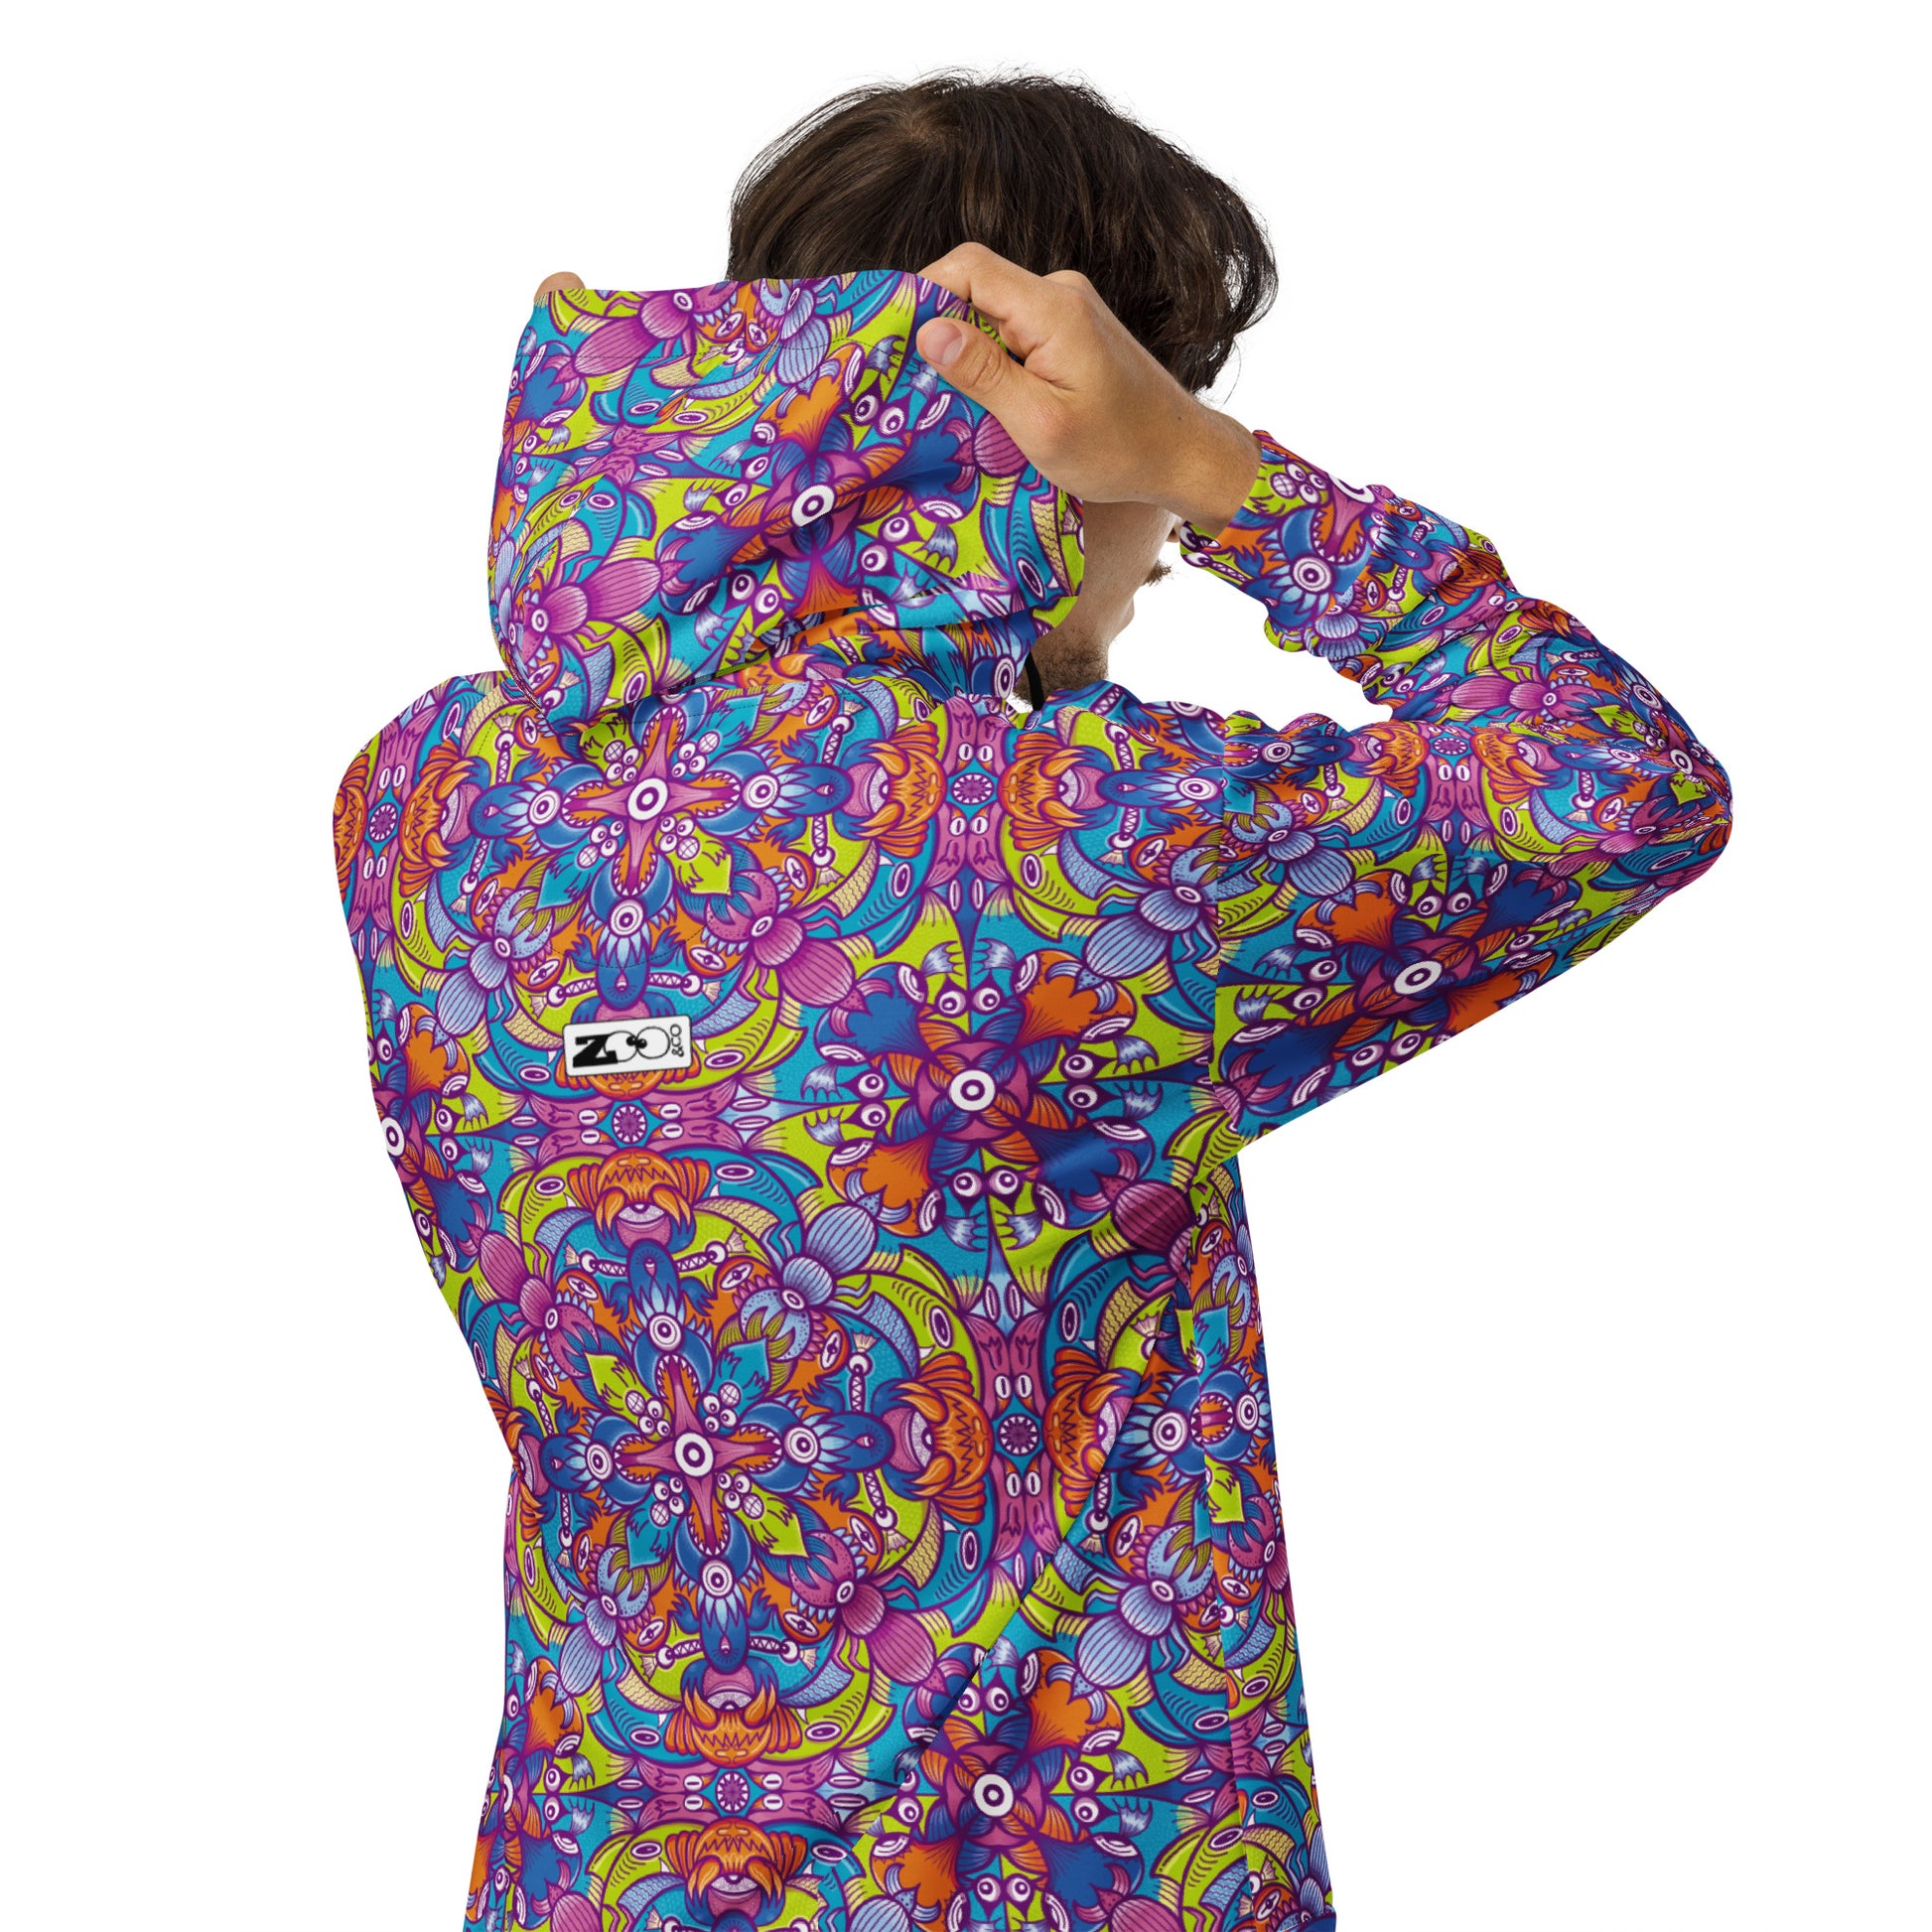 Whimsical Critter Chaos: A Doodle Adventure - Unisex zip hoodie. Back view